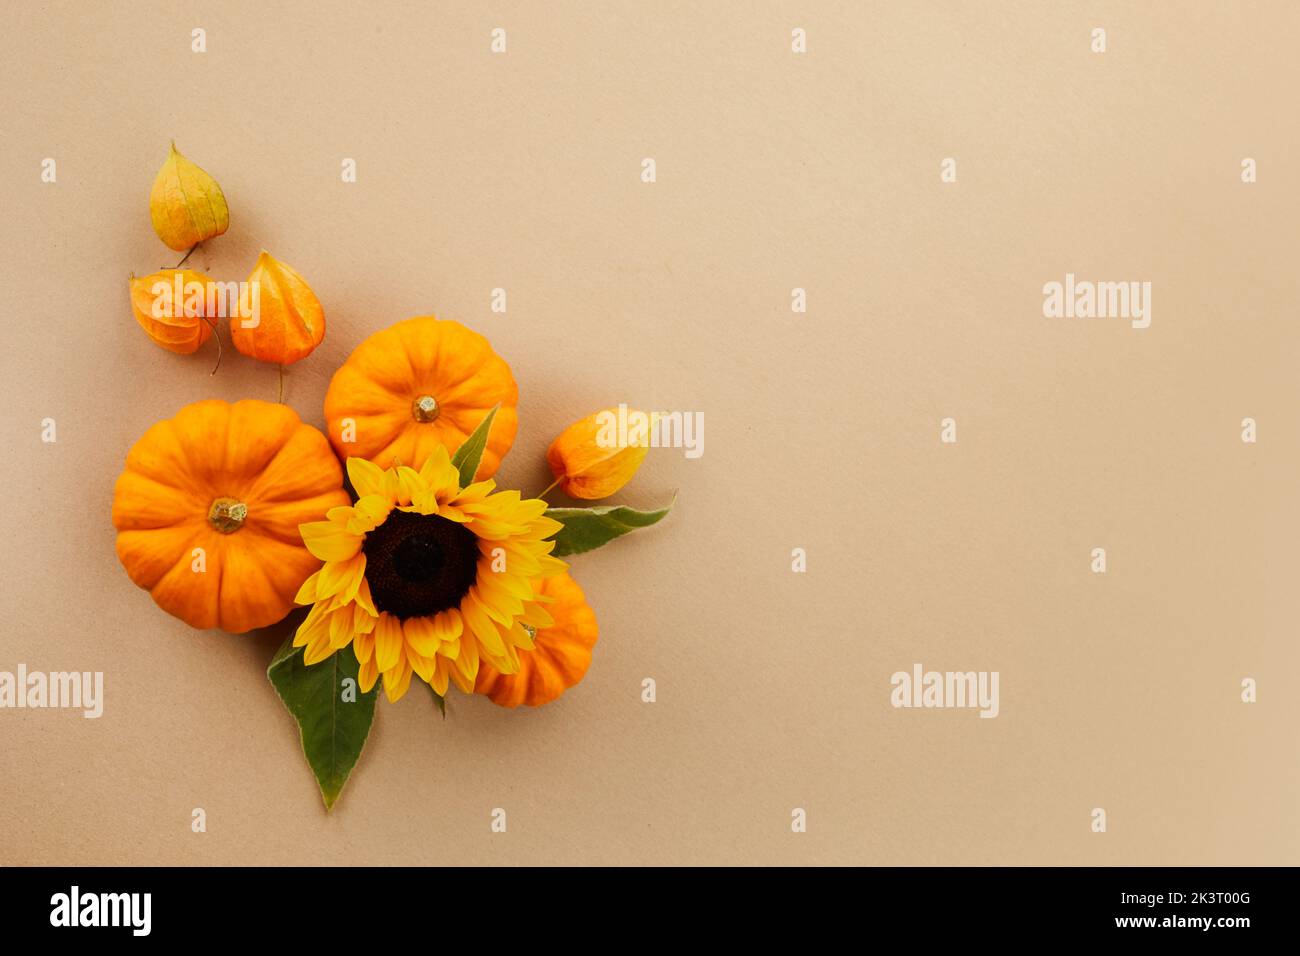 Pumpkin and sunflowers over pastel background with copy space. Autumn background decoration. Stock Photo